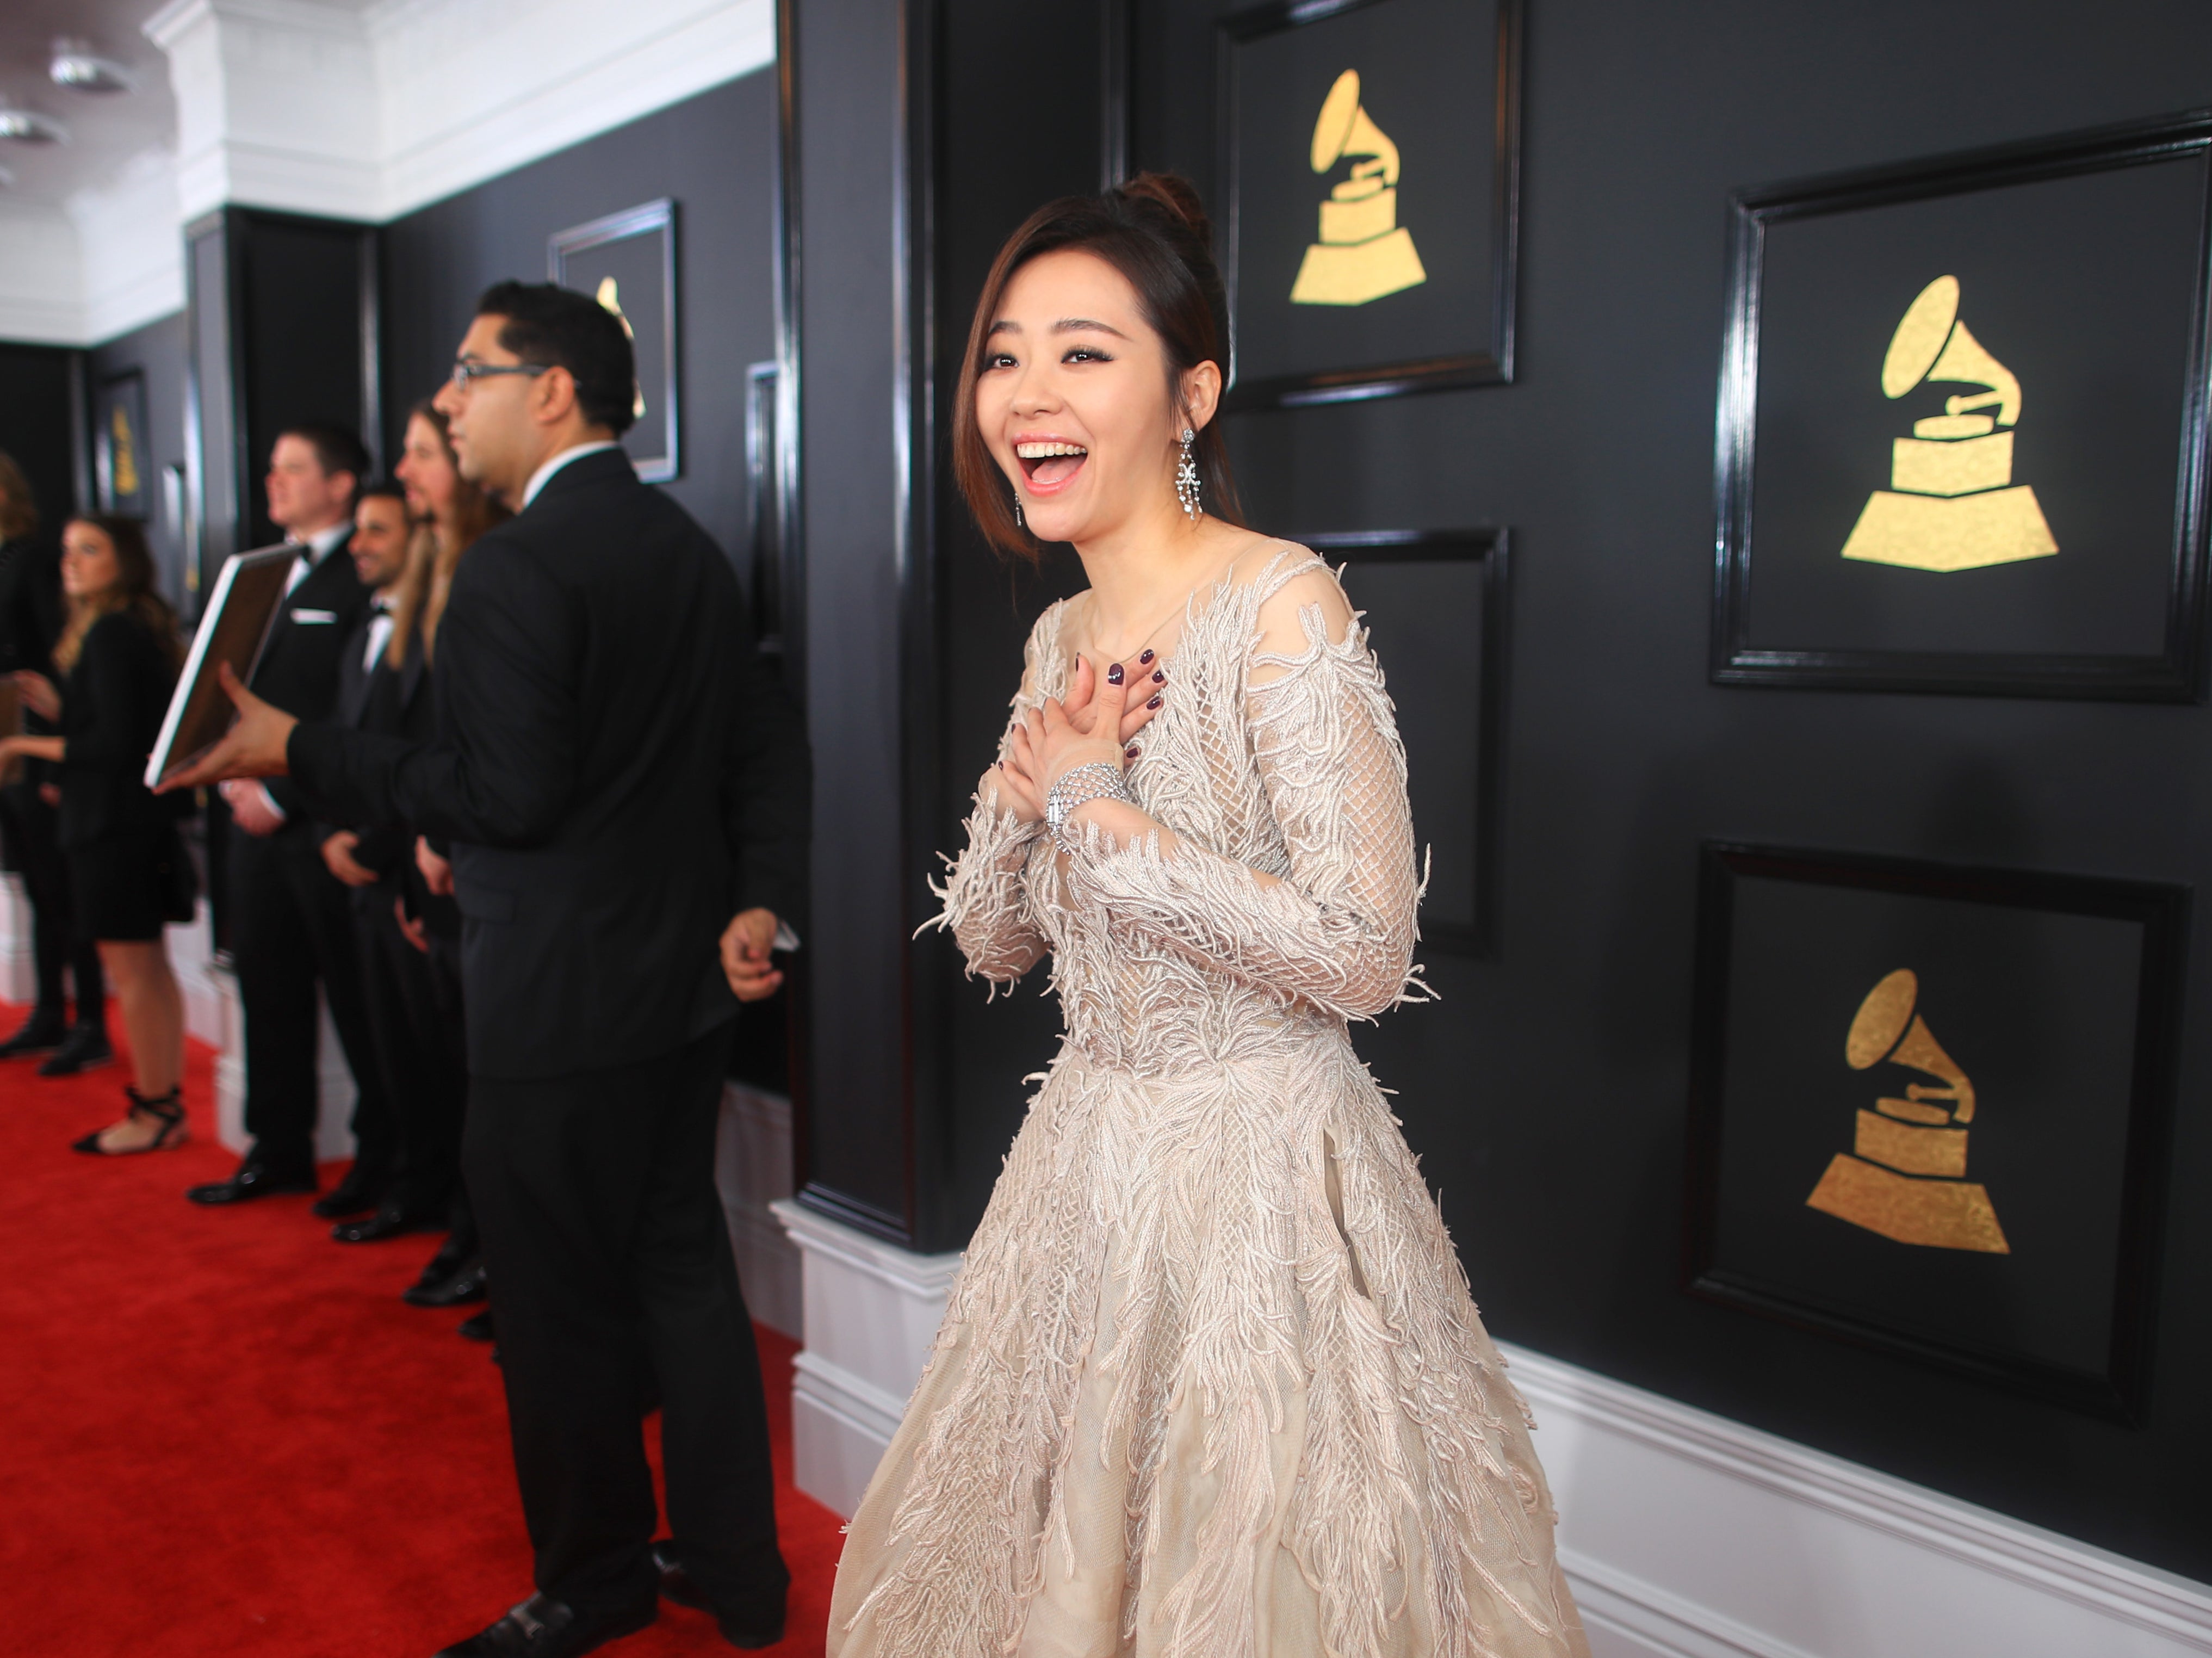 Chinese singer Jane Zhang faces backlash she deliberately contracted Covid